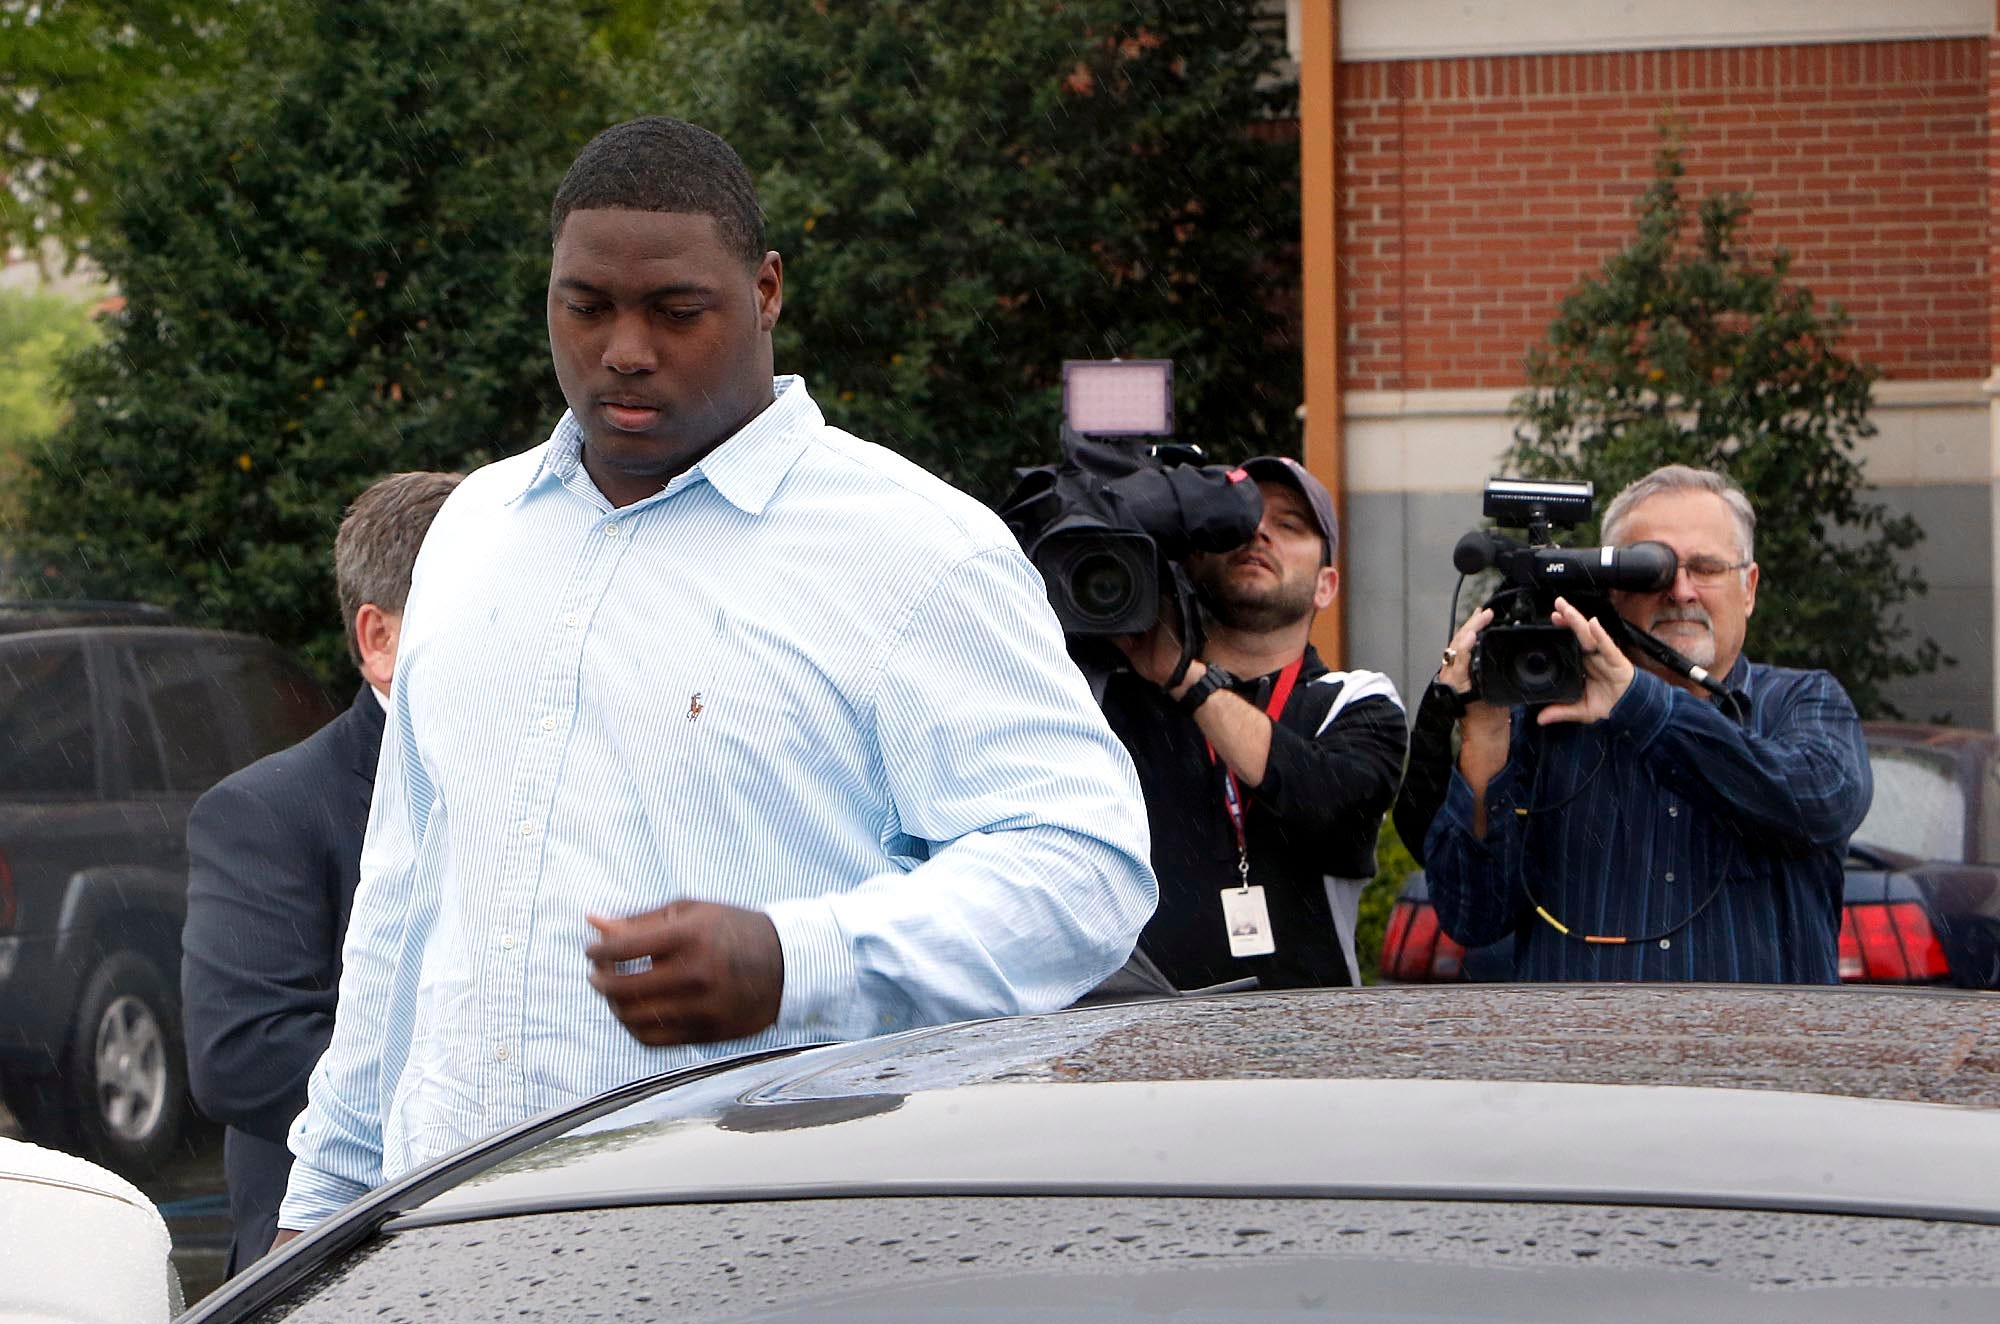 Former University of Alabama football player Jonathan Taylor appeared in court Monday April 6, for the first time on third-degree domestic violence charges. Taylor was accused last Saturday of harming his girlfriend and punching a hole in a door at her apartment. She has since recanted those allegations and is facing a charge of making a false report to law enforcement.
Taylor did not enter a plea at the arraignment scheduled in Tuscaloosa Municipal Court Monday afternoon. His attorney, Keith Veigas of Birmingham, said that the arraignment has been postponed and that a new date has not been set.
UA Coach Nick Saban dismissed Taylor, 21, from the team the following day. He is no longer a UA student and is ineligible for readmission. staff photo | Robert Sutton